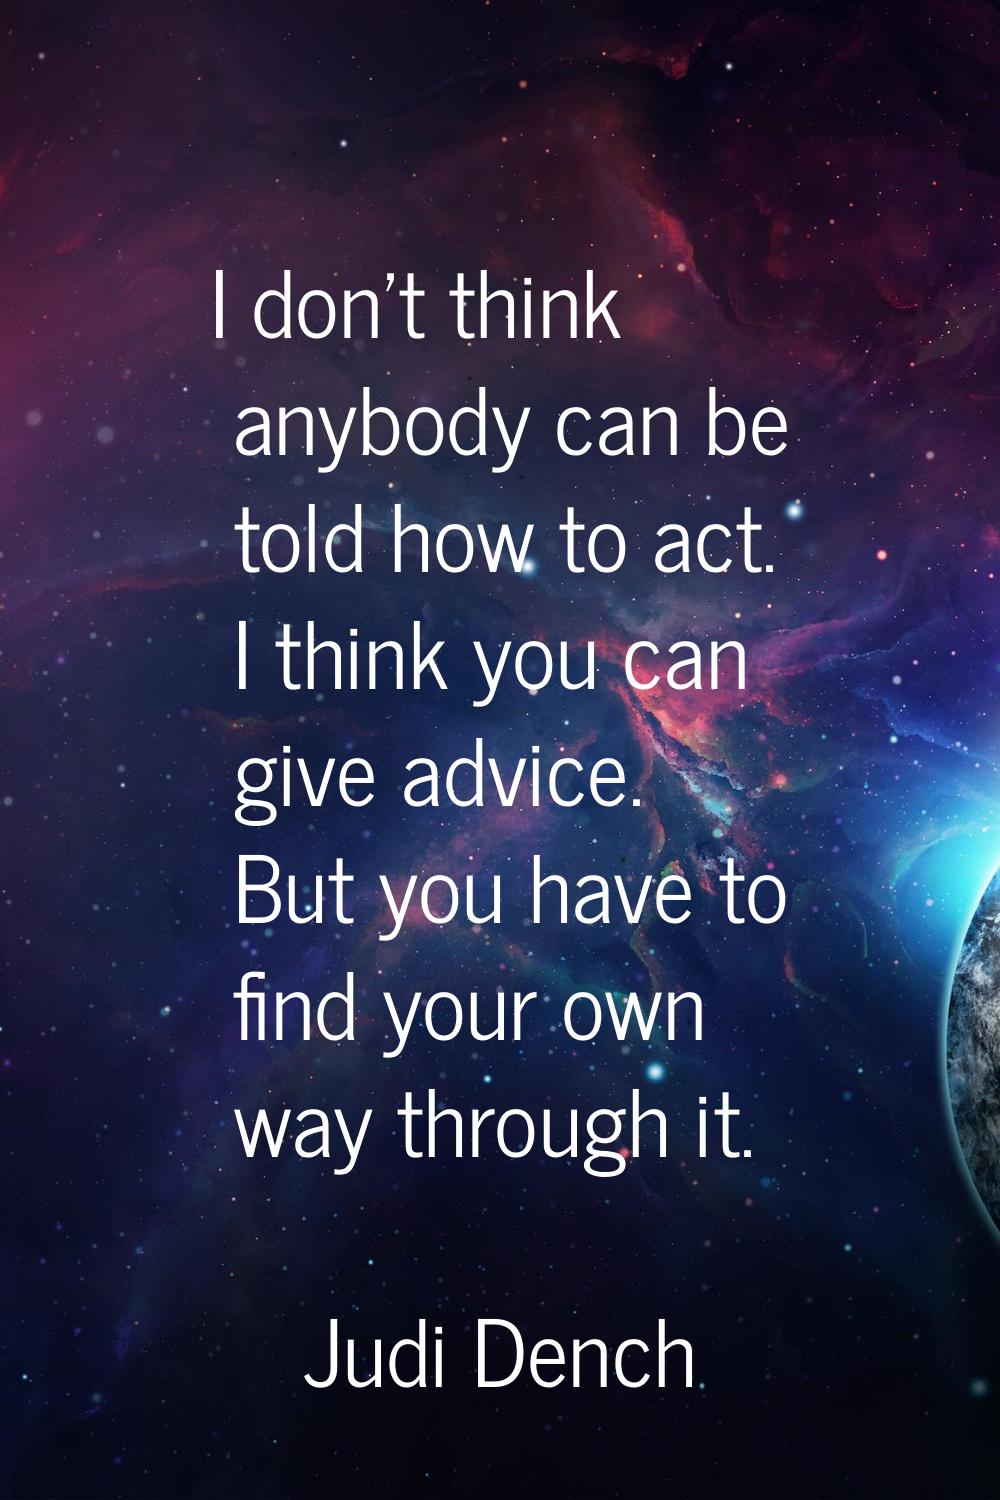 I don't think anybody can be told how to act. I think you can give advice. But you have to find you